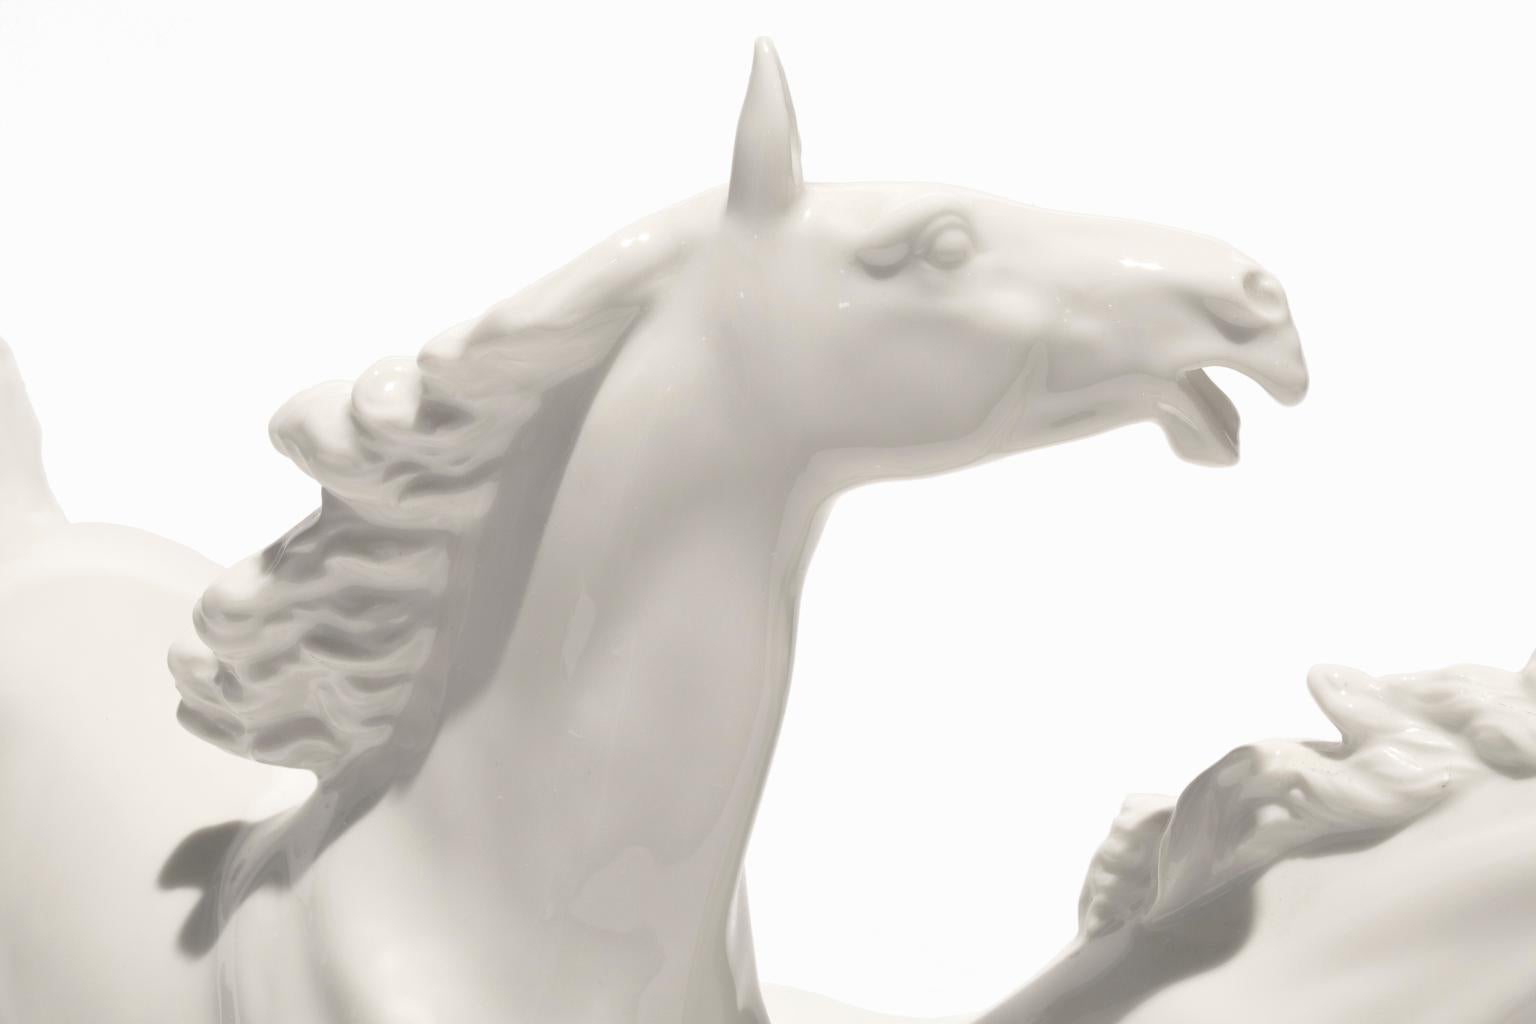 This gorgeous porcelain sculpture from Hutschenreuther porcelain is of two galloping horses, sculpted in exquisite detail and signed by the sculptor, Max Hermann Fritz. Max Hermann Fritz, or MH Fritz, was born in 1873 in Neuhaus and studied under